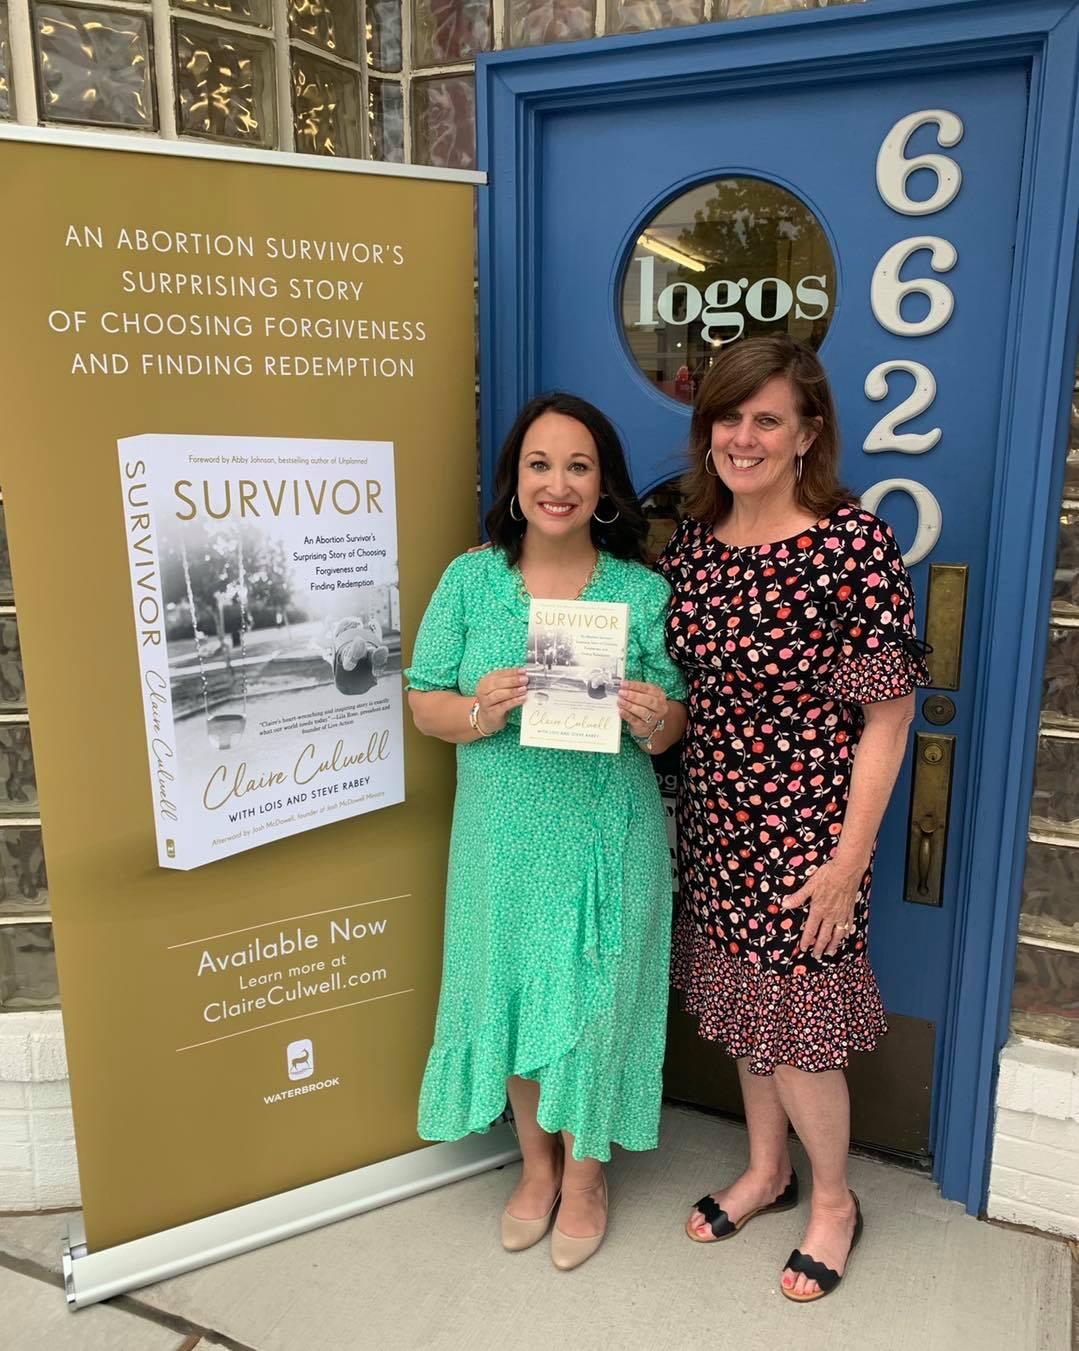 Claire with her adoptive mom at the promotion for her book, "Survivor" (Courtesy of <a href="https://www.facebook.com/ClaireCulwell">Claire Culwell</a>)